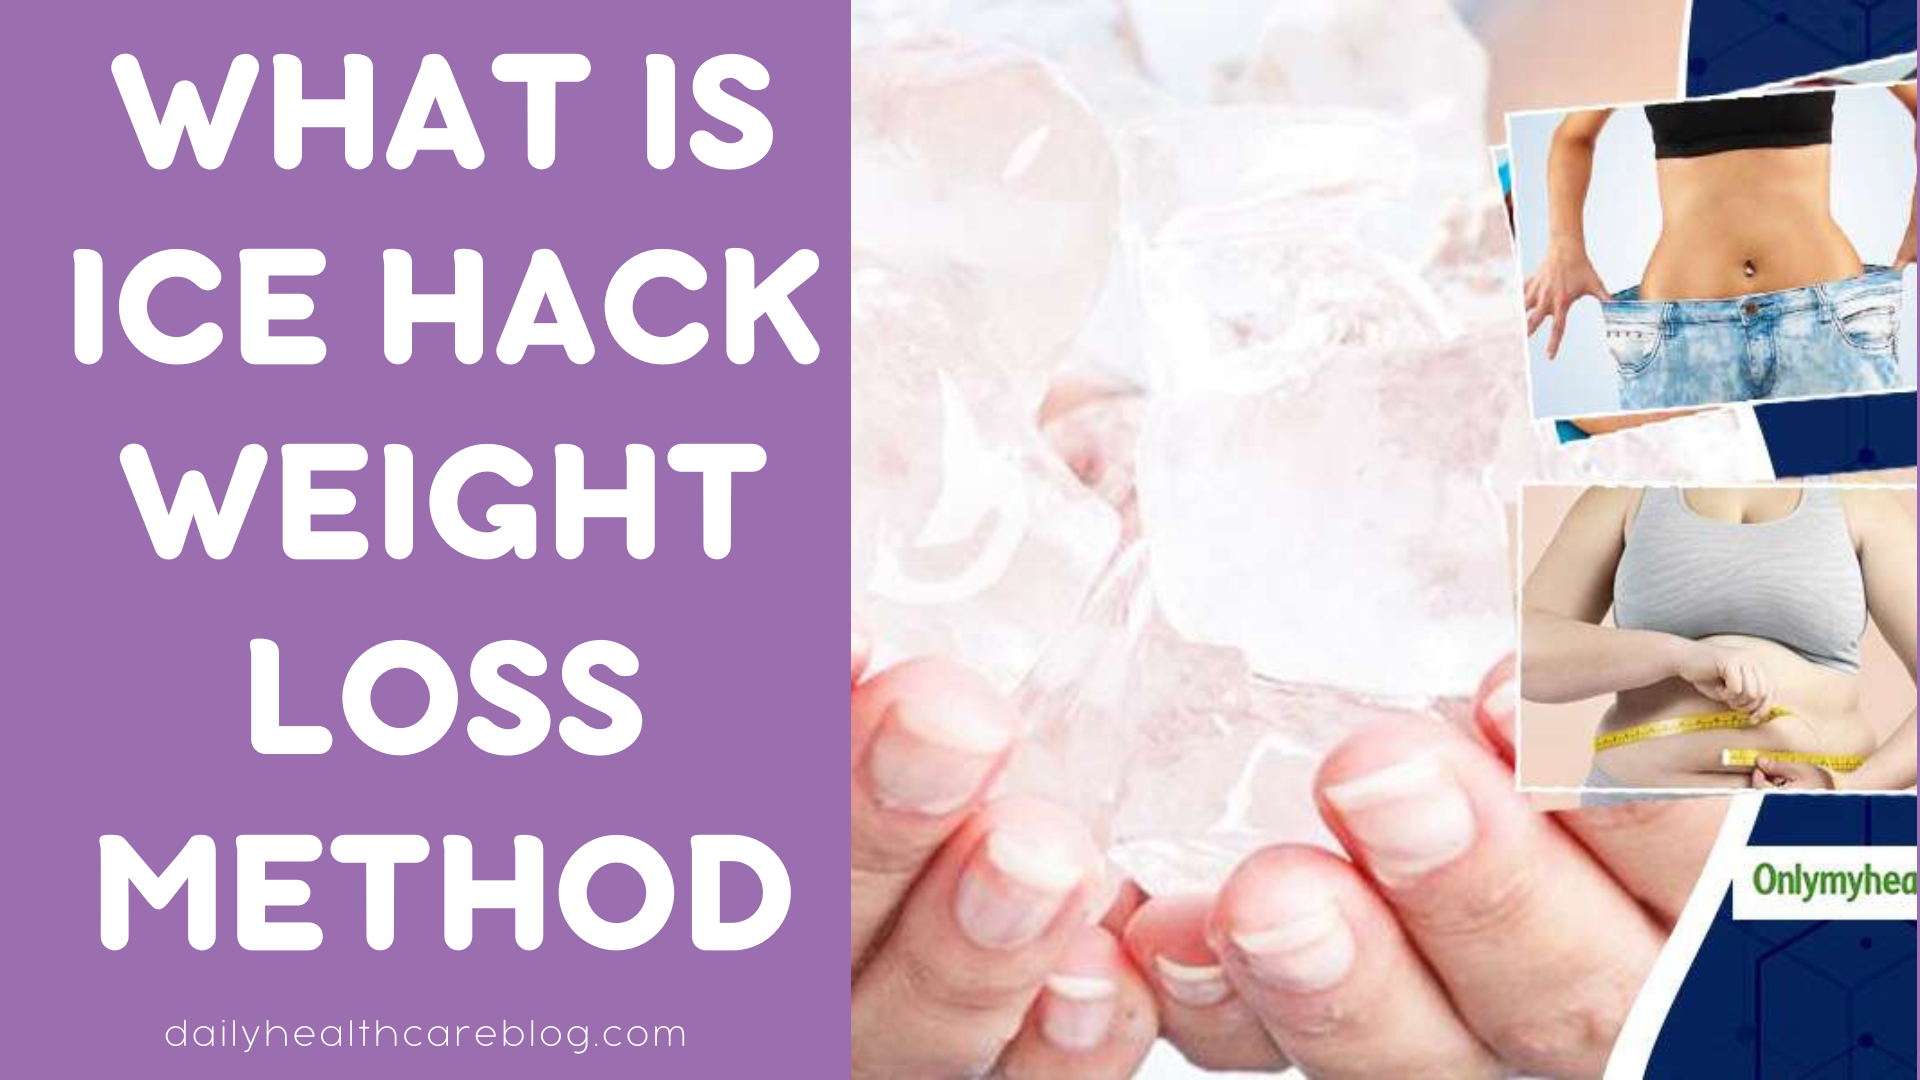 What is ice hack weight loss method